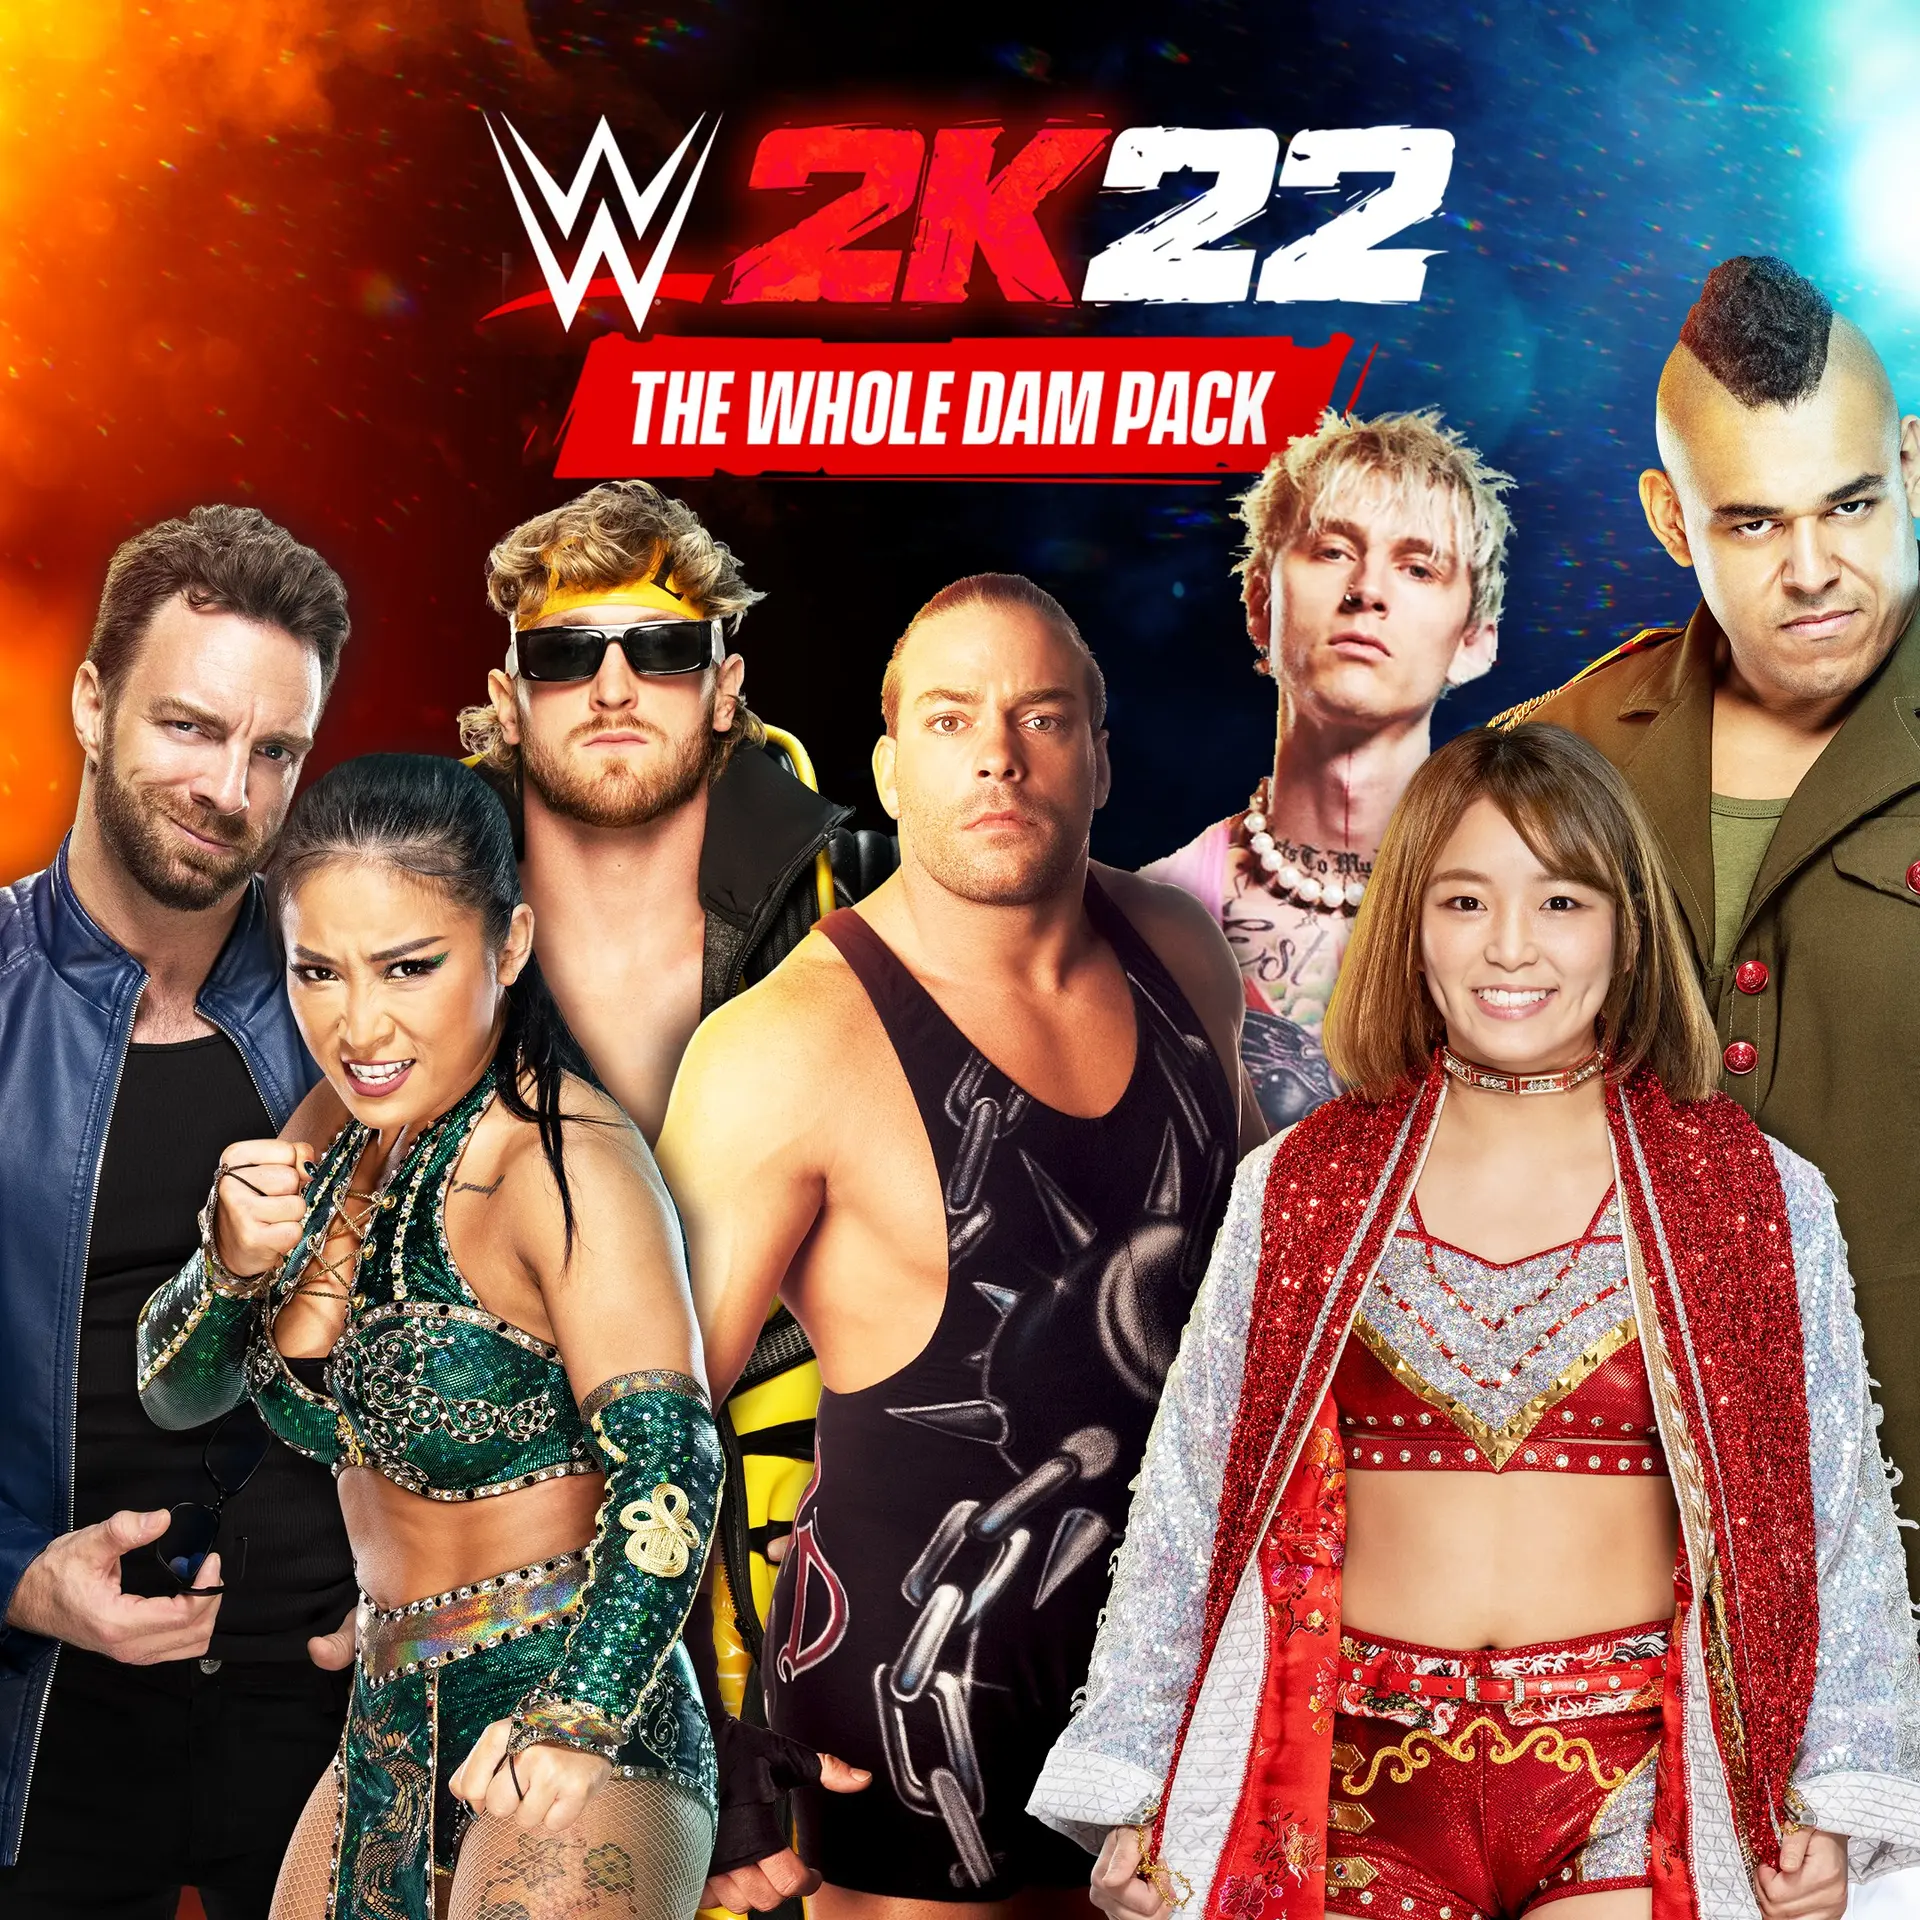 WWE 2K22 The Whole Dam Pack for Xbox One (Xbox Game EU)